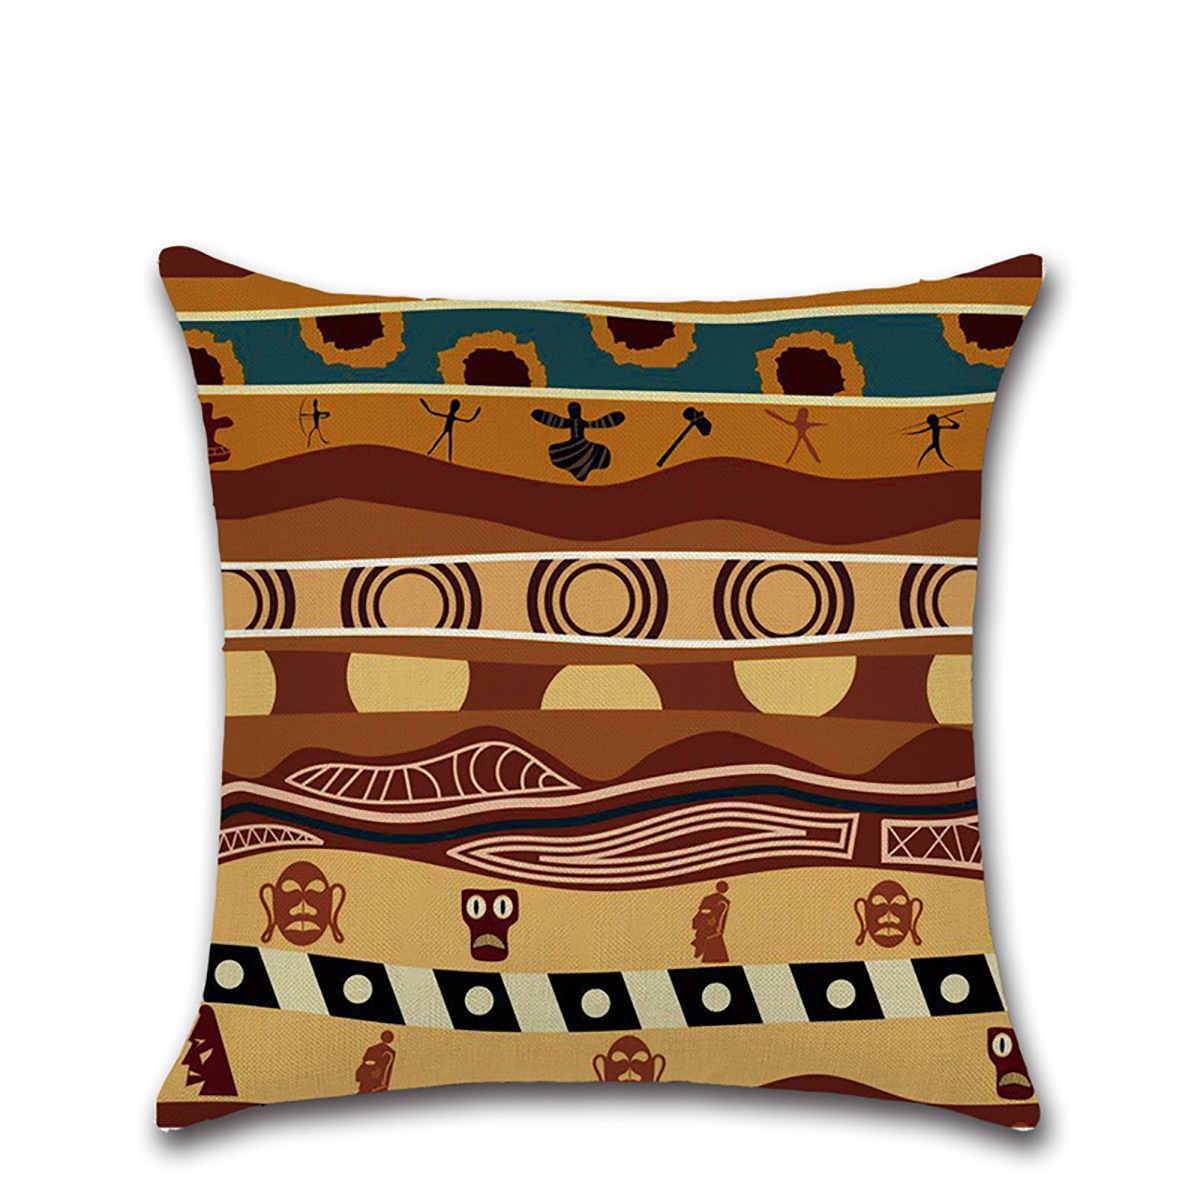 45x45CM-African-National-Style-Geometric-Printing-Cushion-Cover-Linen-Pillow-Case-Home-Decor-Pillow--1915524-6